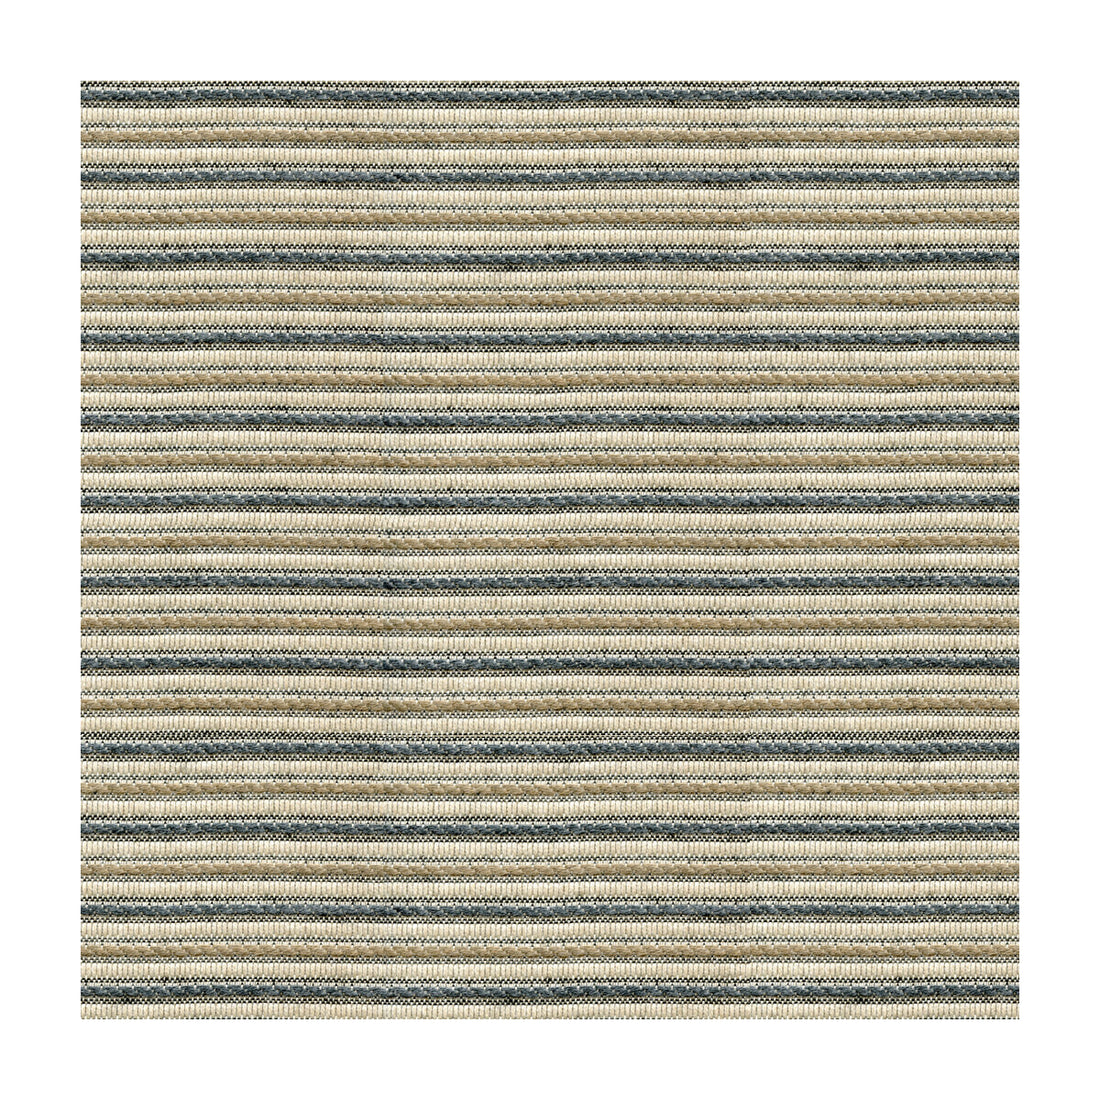 Passageway fabric in pebble color - pattern 34868.1621.0 - by Kravet Design in the Oceania Indoor Outdoor collection